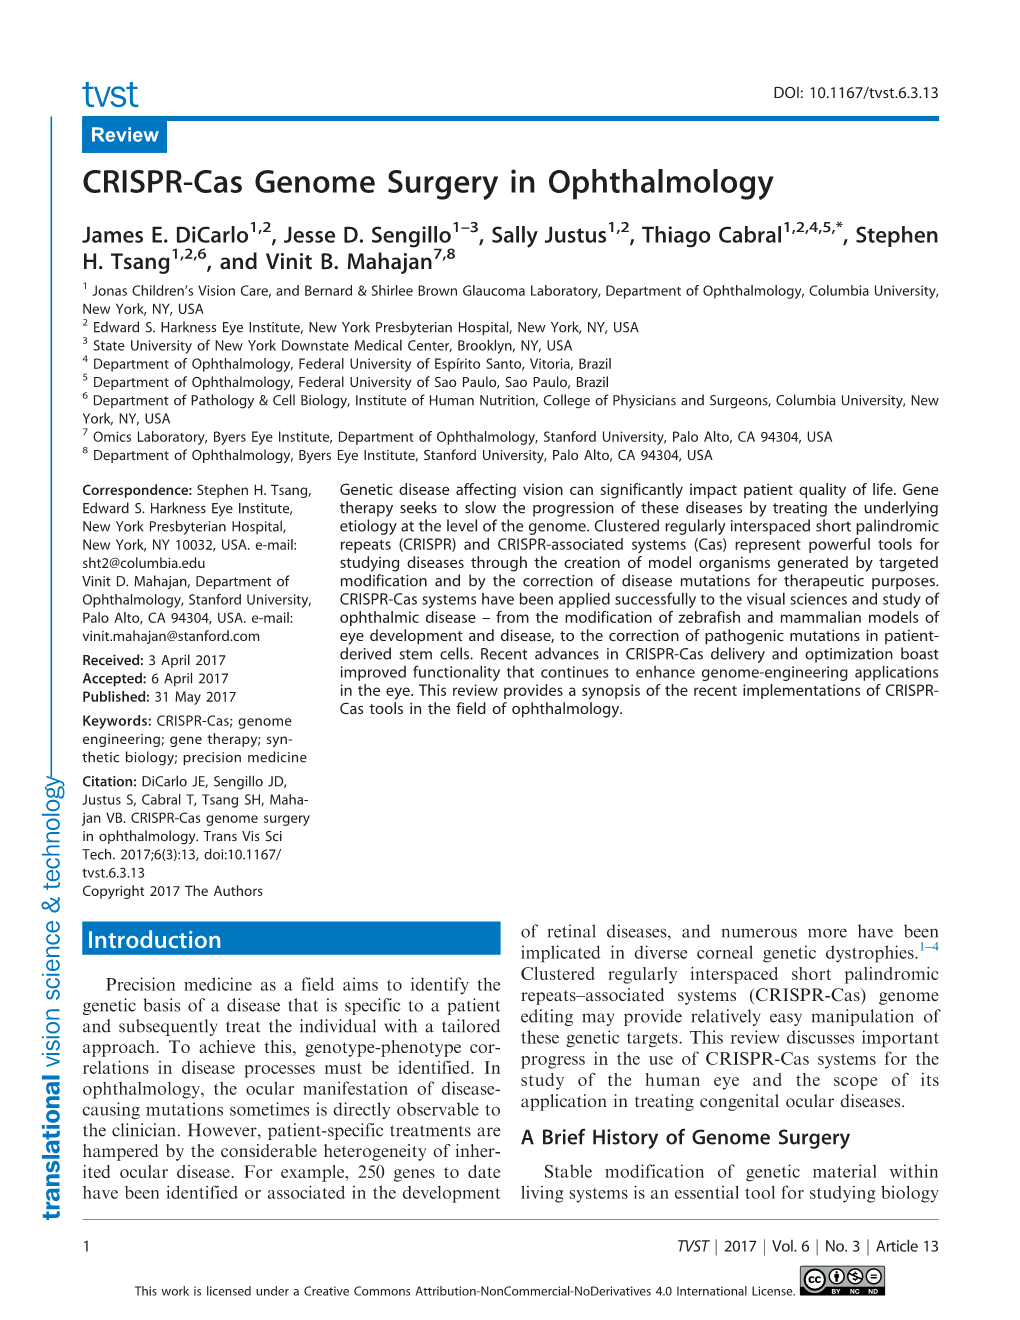 CRISPR-Cas Genome Surgery in Ophthalmology